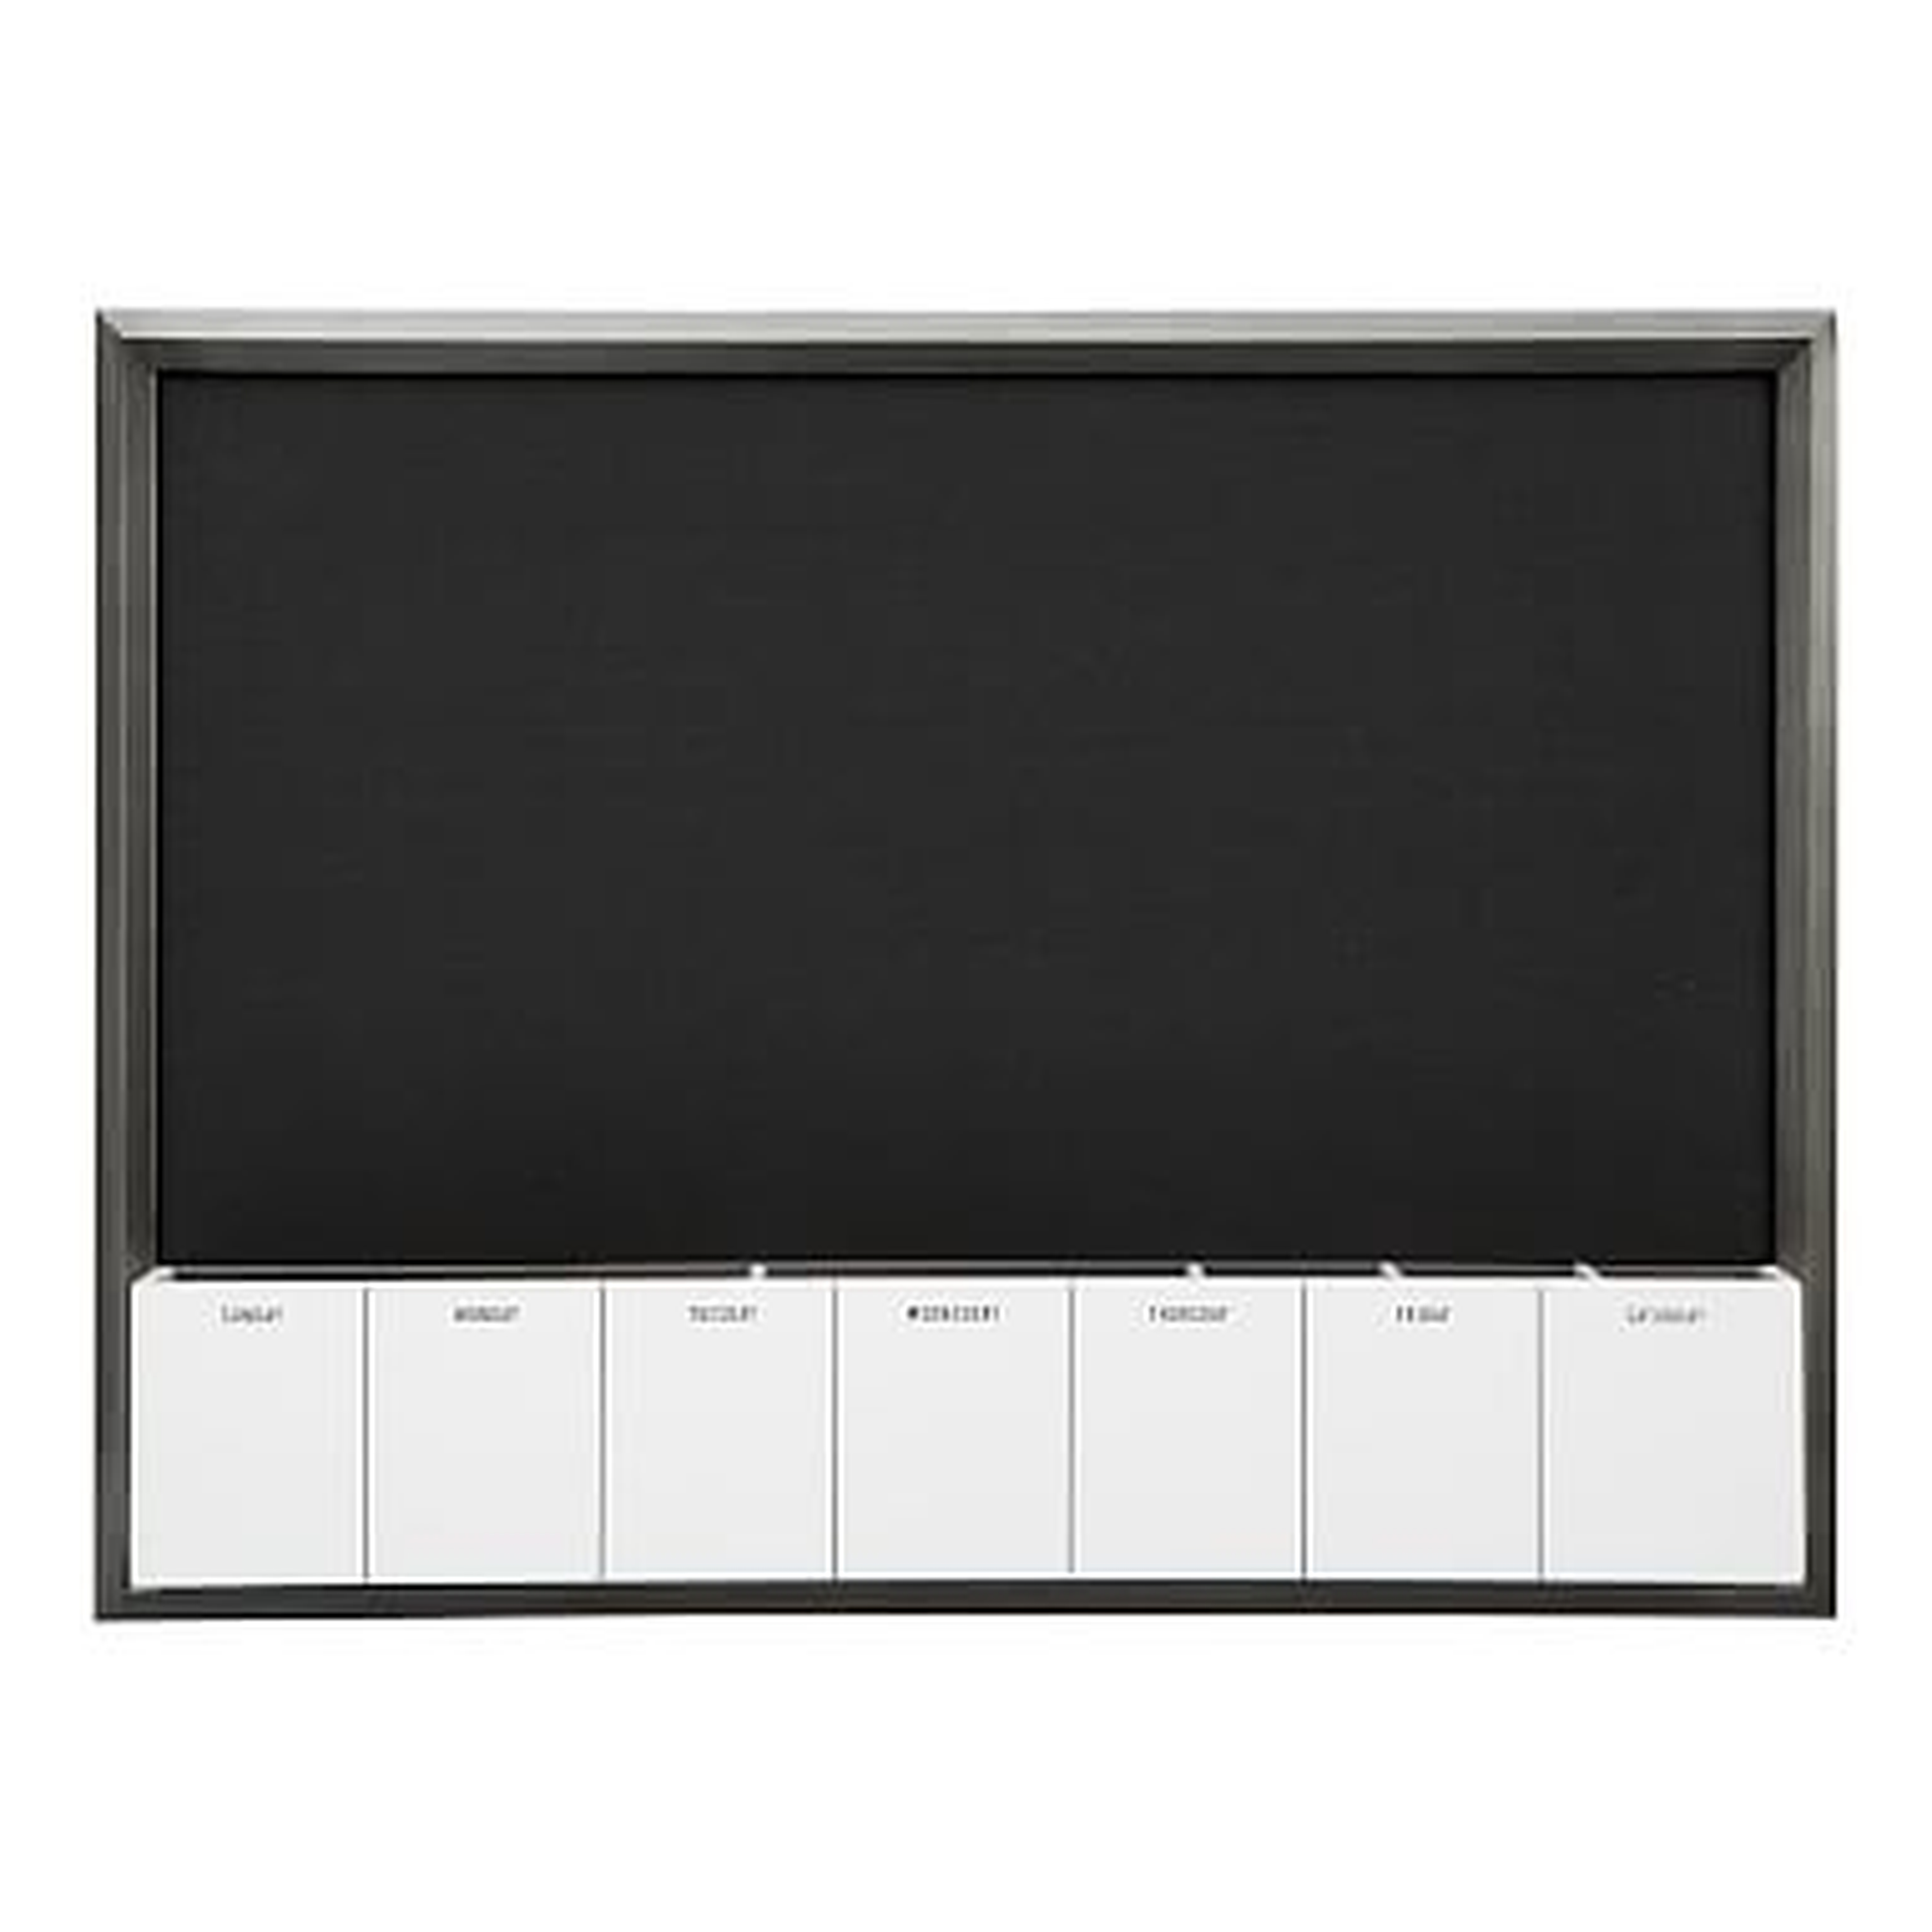 Pinboard With Dry Erase Calendar Cubby, Gray/Black - Pottery Barn Teen